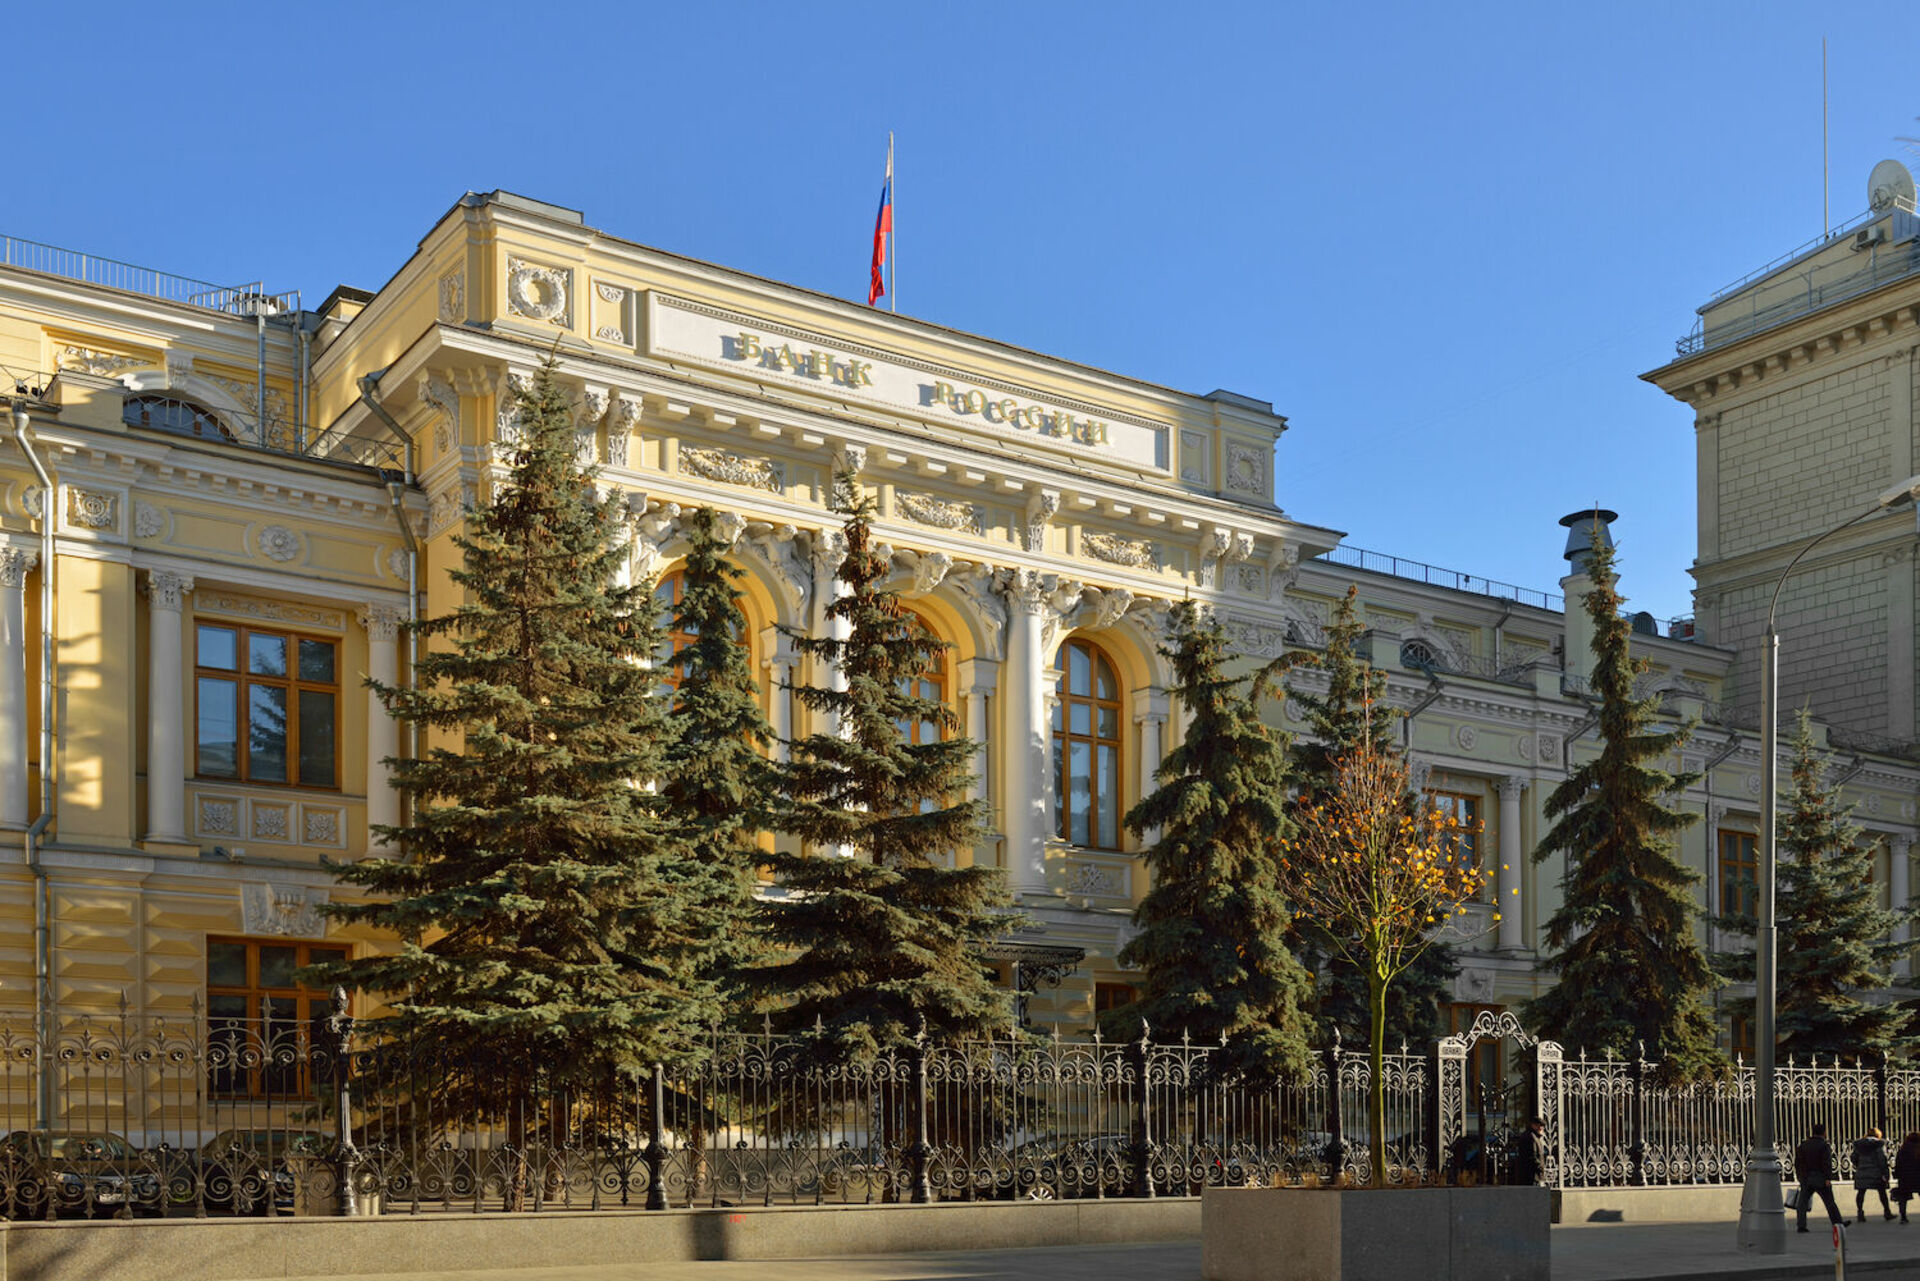 Bank of russian federation